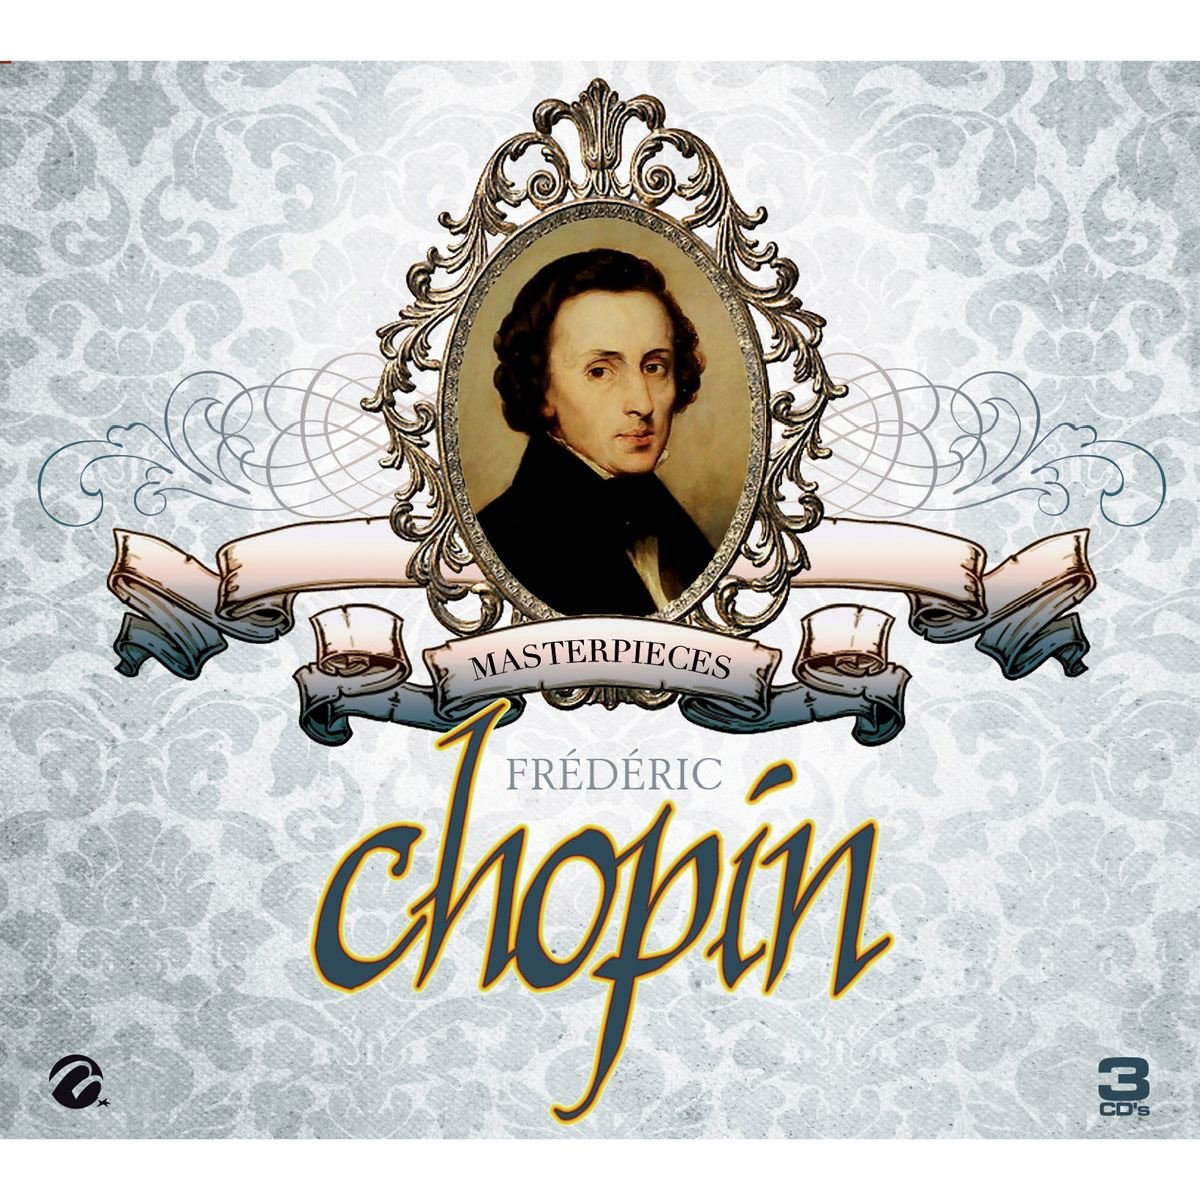 CD3 Frederic Chopin Masterpieces